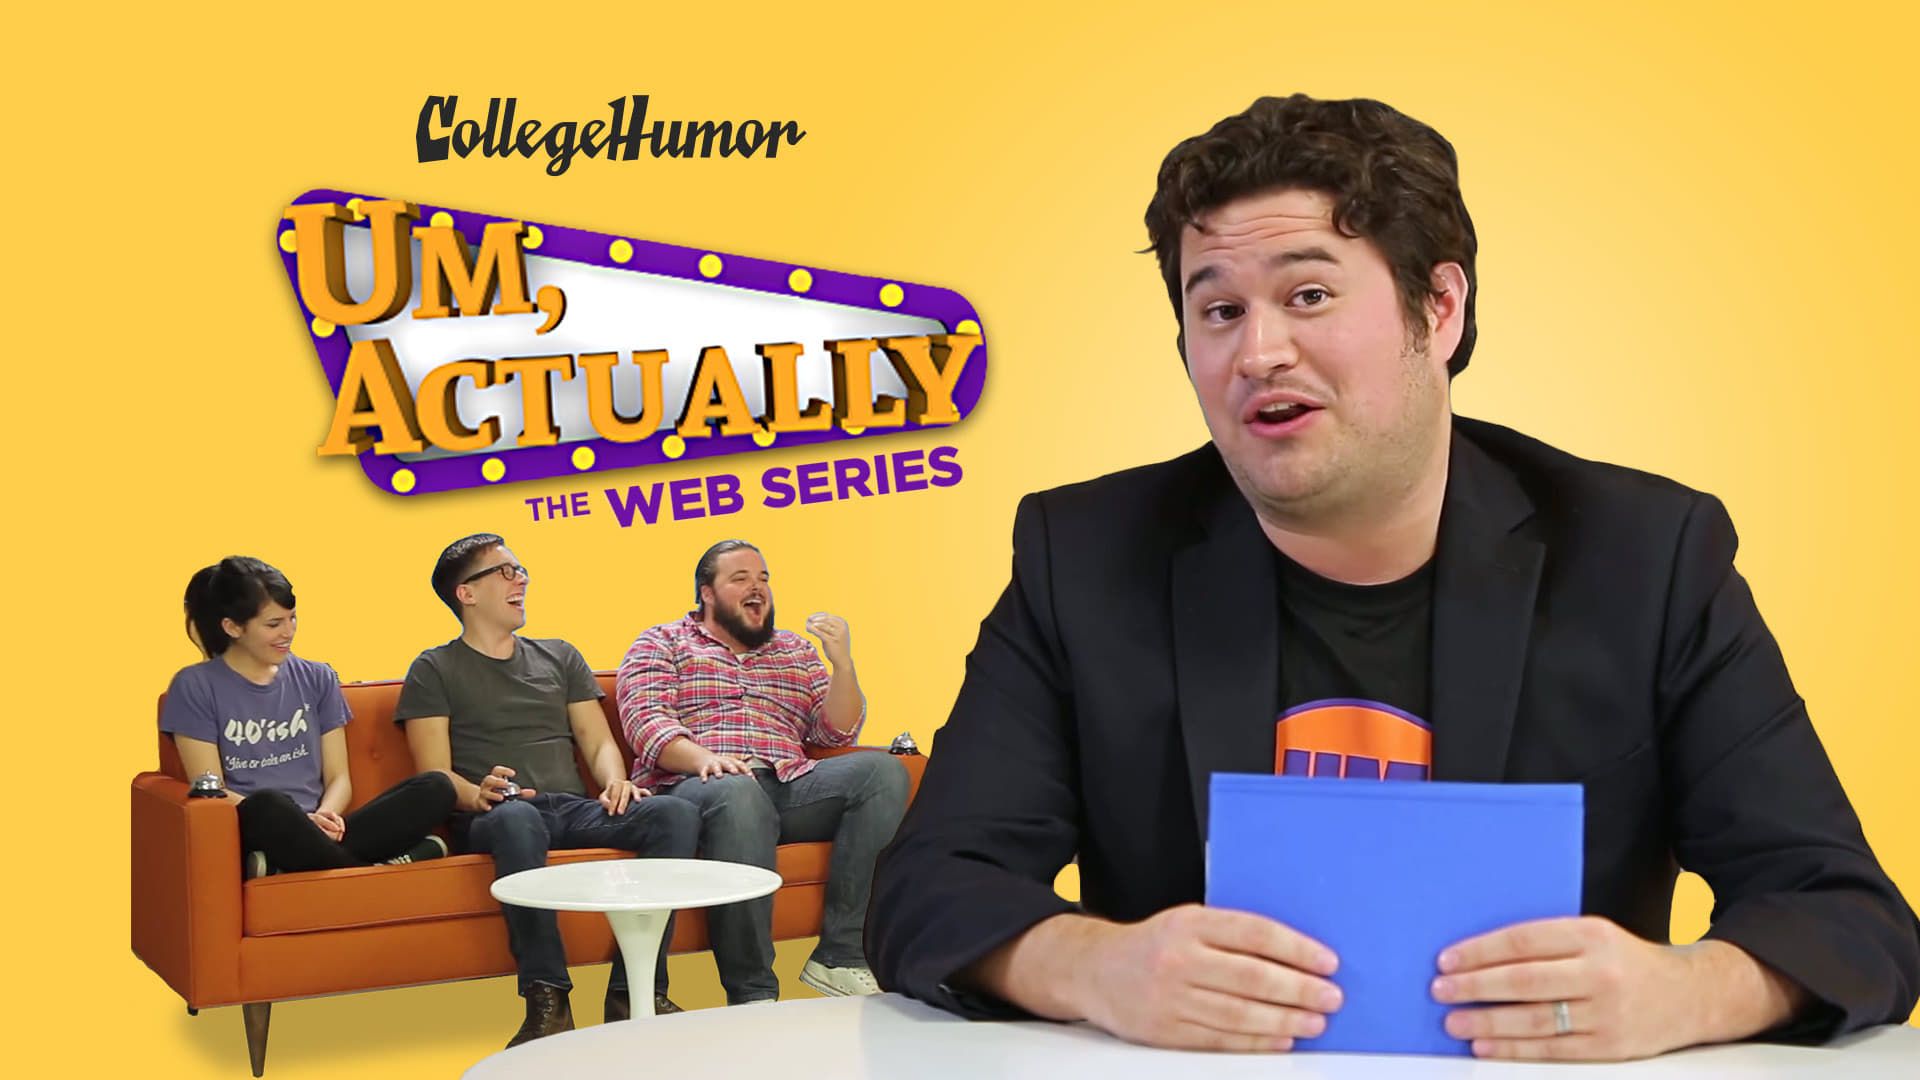 Um, Actually: The Web Series background